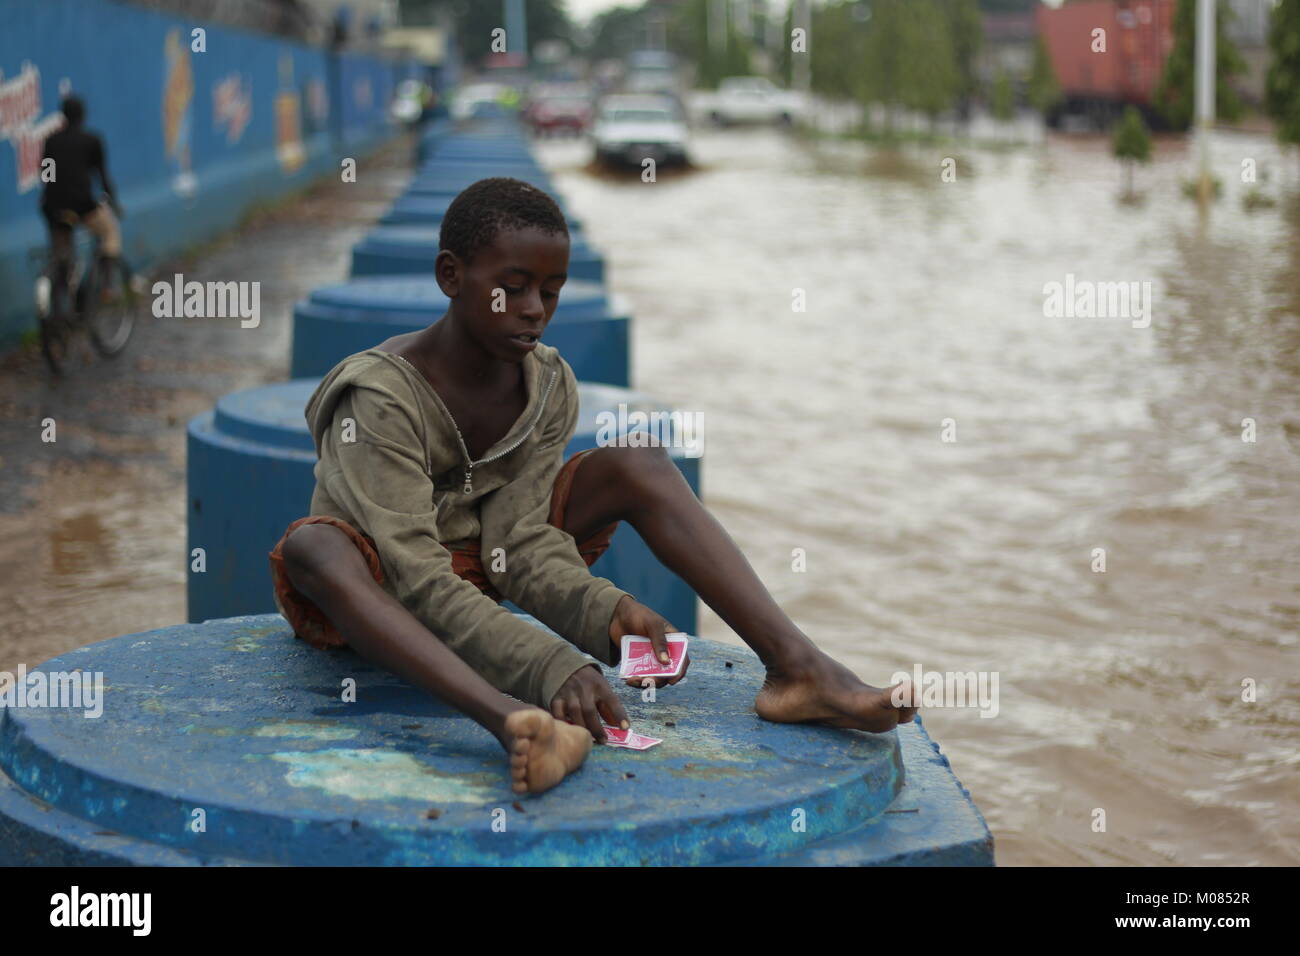 A boy sits playing cards alone on a cement block during a flood in Bujumbura the capital of Burundi Stock Photo